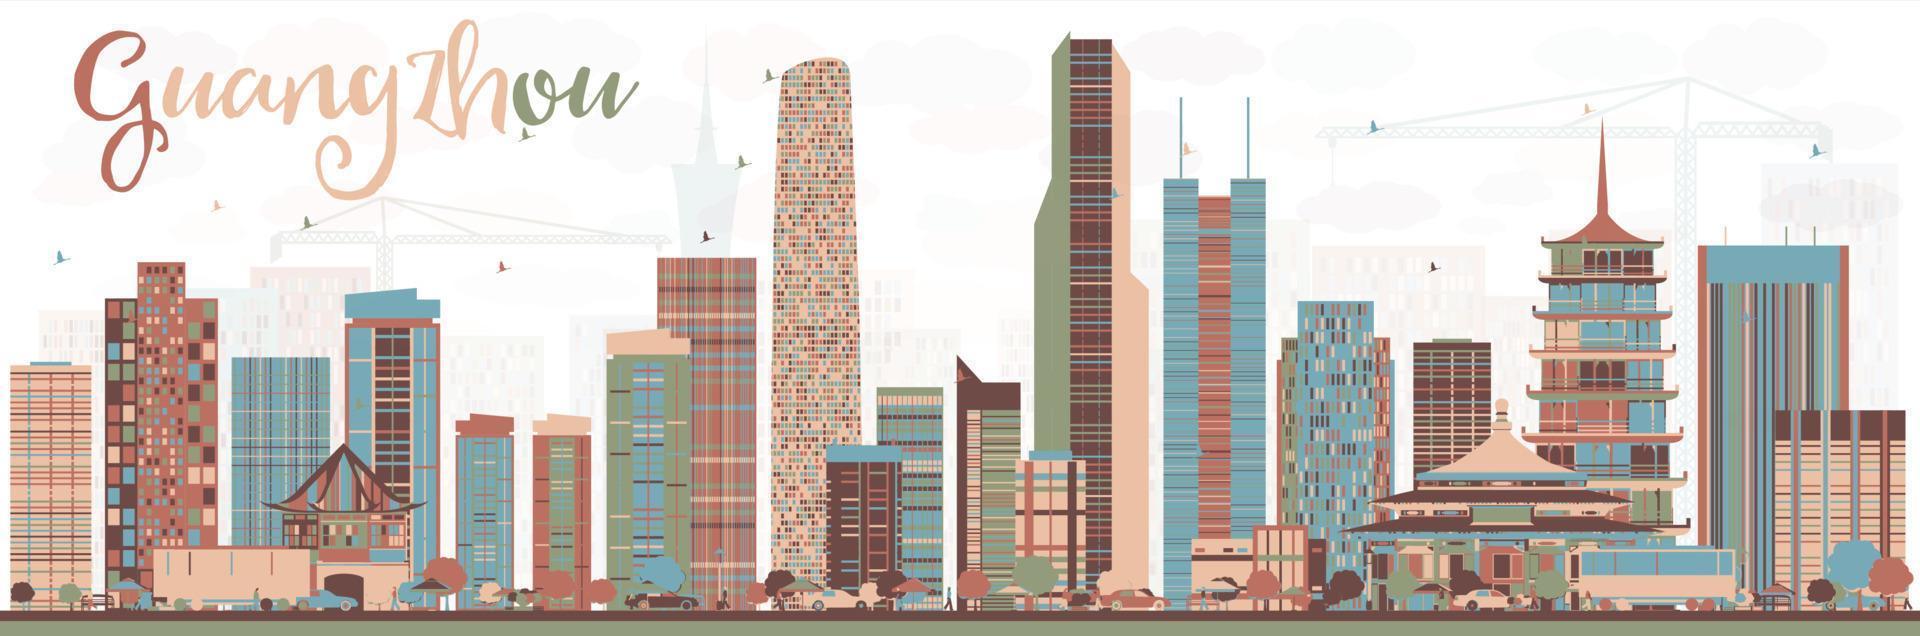 Abstract Guangzhou China City Skyline with Color Buildings. vector